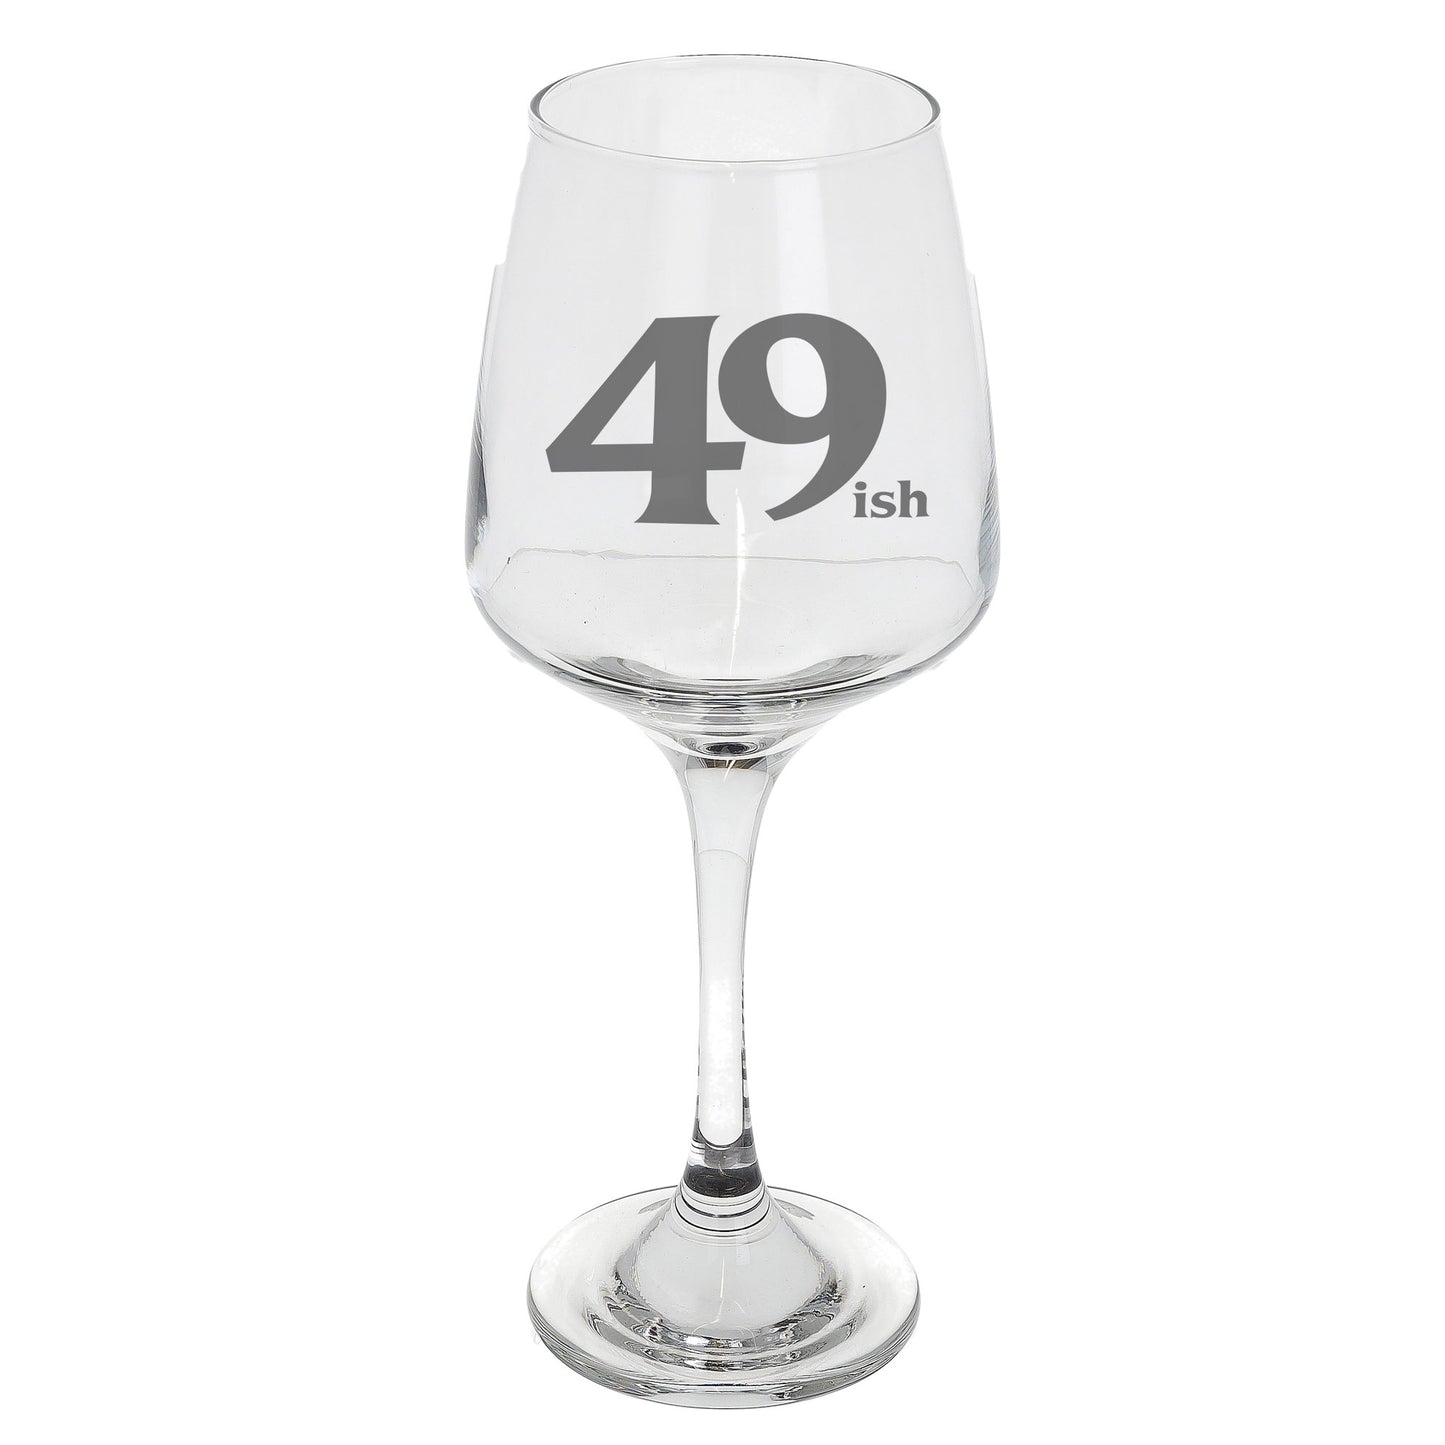 49ish Wine Glass and/or Coaster Set  - Always Looking Good - Wine Glass On Its Own  